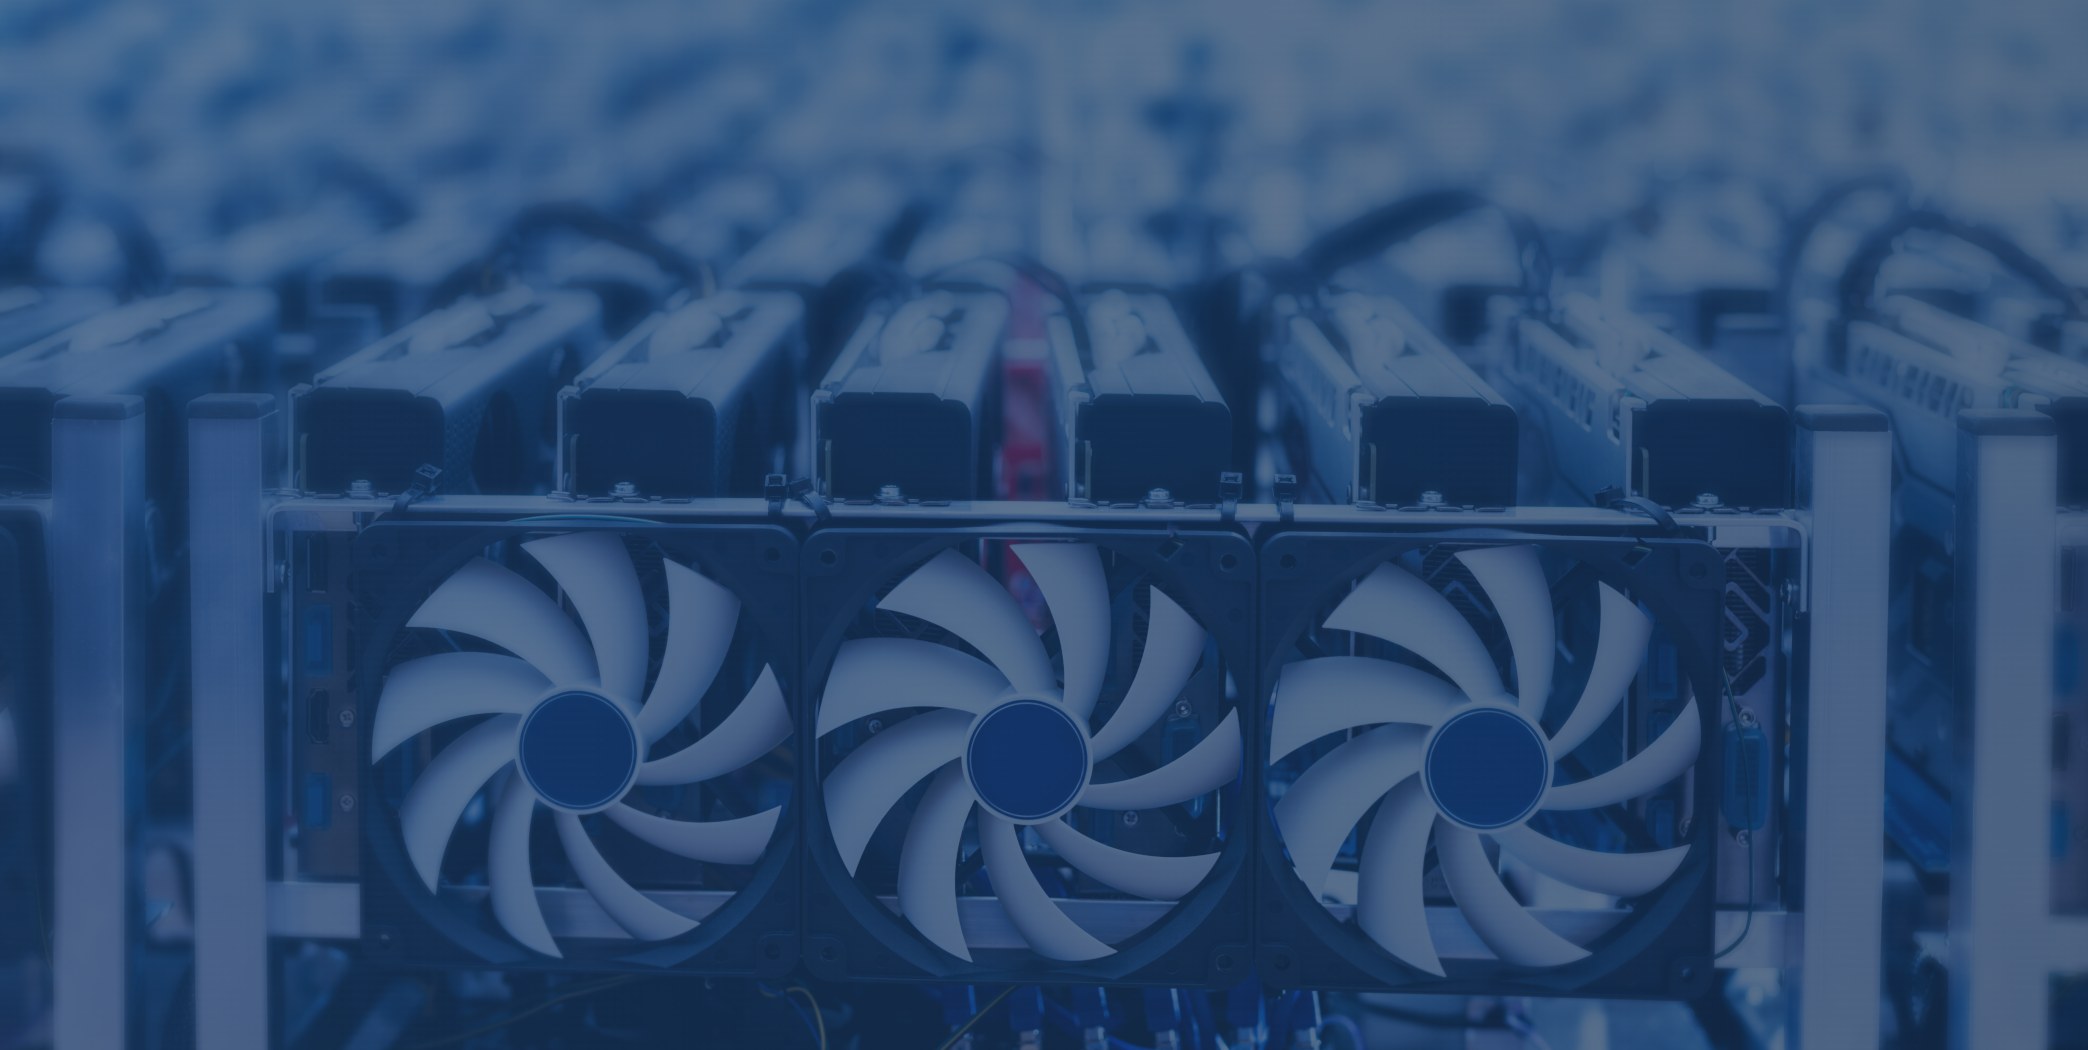 Solo Bitcoin Miner Solves Block With Hash Rate of Just 10 TH/s